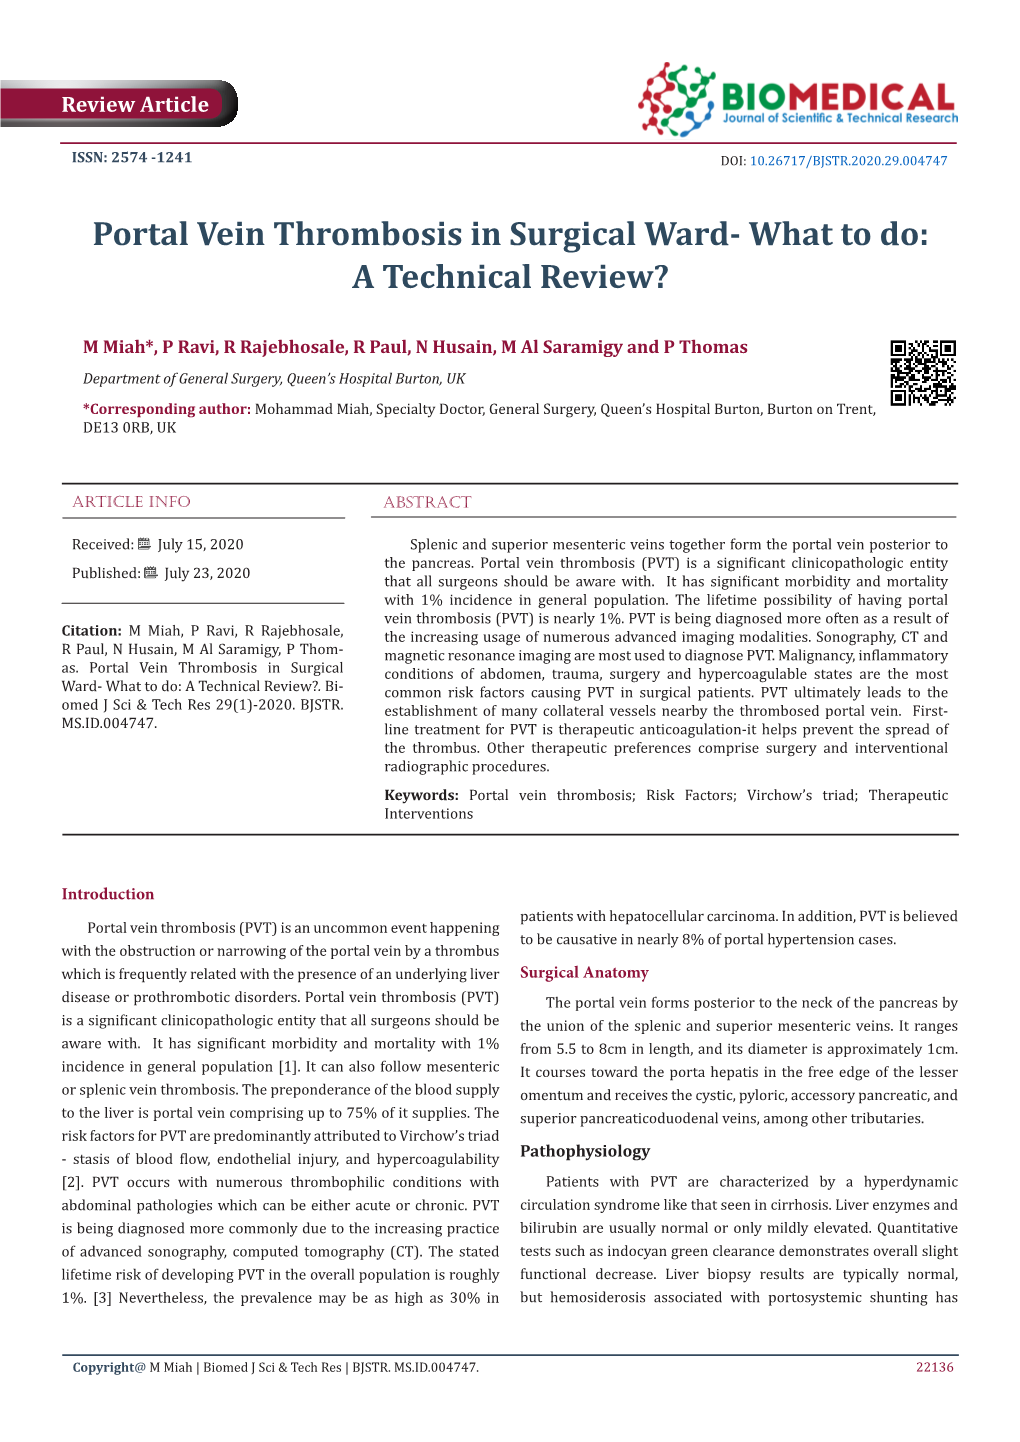 Portal Vein Thrombosis in Surgical Ward- What to Do: a Technical Review?